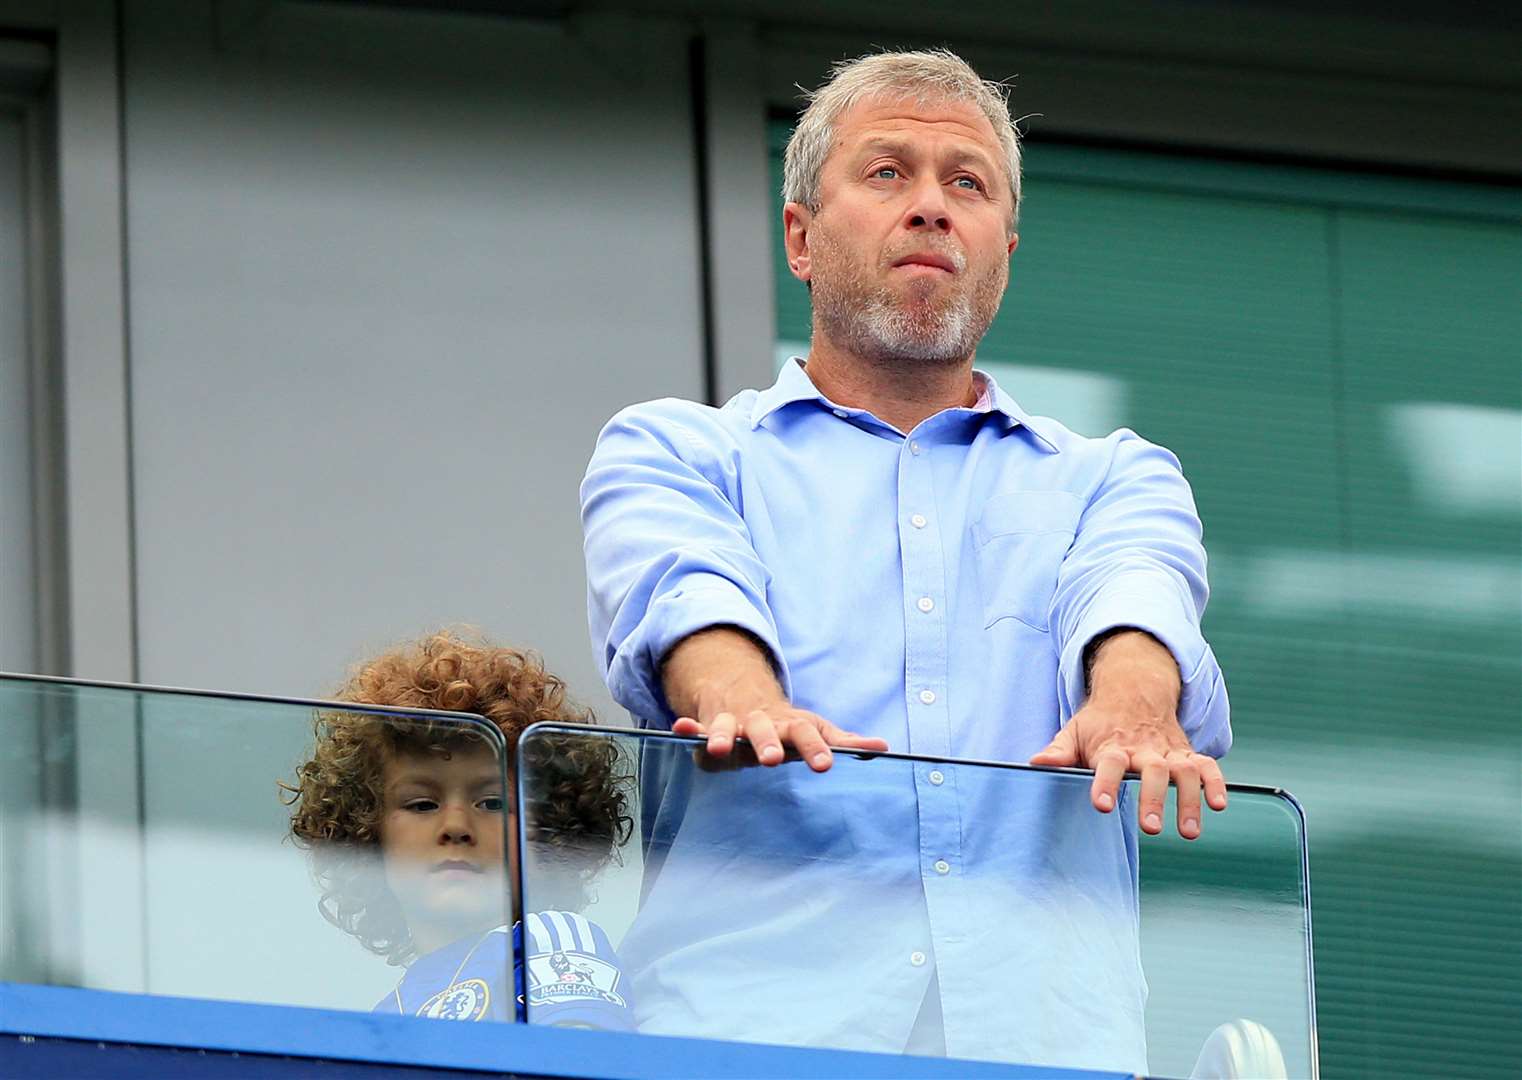 Chelsea FC owner Roman Abramovich, an ally of President Vladimir Putin, is one Russian oligarch who could face sanctions (Mike Egerton/PA)